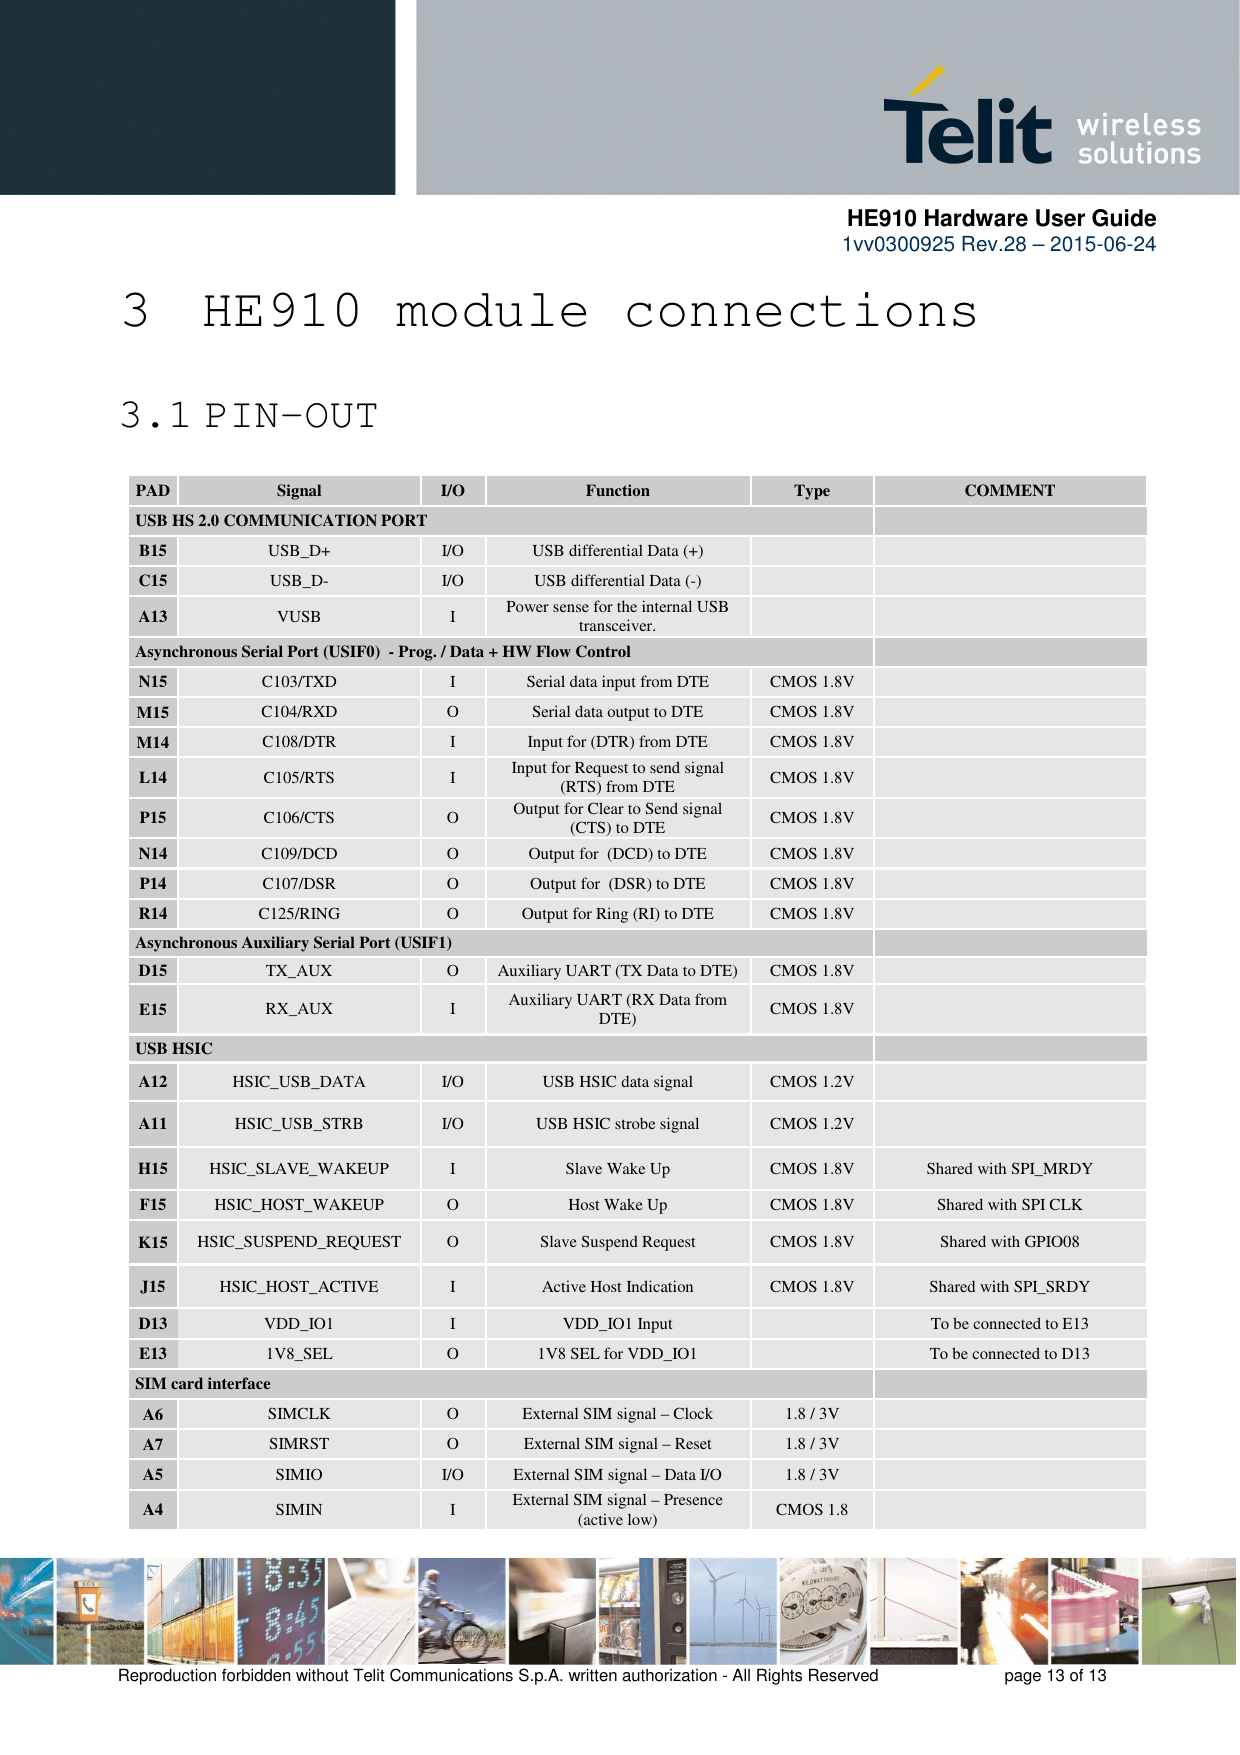      HE910 Hardware User Guide 1vv0300925 Rev.28 – 2015-06-24    Reproduction forbidden without Telit Communications S.p.A. written authorization - All Rights Reserved    page 13 of 13  3 HE910 module connections  3.1 PIN-OUT PAD Signal  I/O  Function  Type  COMMENT USB HS 2.0 COMMUNICATION PORT       B15  USB_D+  I/O  USB differential Data (+)     C15  USB_D-  I/O  USB differential Data (-)     A13  VUSB  I  Power sense for the internal USB transceiver.     Asynchronous Serial Port (USIF0)  - Prog. / Data + HW Flow Control     N15  C103/TXD  I  Serial data input from DTE  CMOS 1.8V   M15 C104/RXD  O  Serial data output to DTE  CMOS 1.8V   M14 C108/DTR  I  Input for (DTR) from DTE  CMOS 1.8V   L14  C105/RTS  I  Input for Request to send signal (RTS) from DTE  CMOS 1.8V   P15  C106/CTS  O  Output for Clear to Send signal (CTS) to DTE CMOS 1.8V   N14  C109/DCD  O  Output for  (DCD) to DTE  CMOS 1.8V   P14  C107/DSR  O  Output for  (DSR) to DTE  CMOS 1.8V   R14  C125/RING  O  Output for Ring (RI) to DTE  CMOS 1.8V   Asynchronous Auxiliary Serial Port (USIF1)       D15  TX_AUX  O  Auxiliary UART (TX Data to DTE)  CMOS 1.8V   E15  RX_AUX  I  Auxiliary UART (RX Data from DTE)  CMOS 1.8V   USB HSIC       A12  HSIC_USB_DATA  I/O  USB HSIC data signal  CMOS 1.2V   A11  HSIC_USB_STRB  I/O  USB HSIC strobe signal  CMOS 1.2V   H15  HSIC_SLAVE_WAKEUP  I  Slave Wake Up  CMOS 1.8V  Shared with SPI_MRDY F15  HSIC_HOST_WAKEUP  O  Host Wake Up  CMOS 1.8V  Shared with SPI CLK K15  HSIC_SUSPEND_REQUEST  O  Slave Suspend Request  CMOS 1.8V  Shared with GPIO08  J15  HSIC_HOST_ACTIVE  I  Active Host Indication  CMOS 1.8V  Shared with SPI_SRDY D13  VDD_IO1  I  VDD_IO1 Input    To be connected to E13 E13  1V8_SEL  O  1V8 SEL for VDD_IO1    To be connected to D13 SIM card interface         A6  SIMCLK  O  External SIM signal – Clock  1.8 / 3V   A7  SIMRST  O  External SIM signal – Reset  1.8 / 3V   A5  SIMIO  I/O  External SIM signal – Data I/O  1.8 / 3V   A4  SIMIN  I  External SIM signal – Presence (active low)  CMOS 1.8   